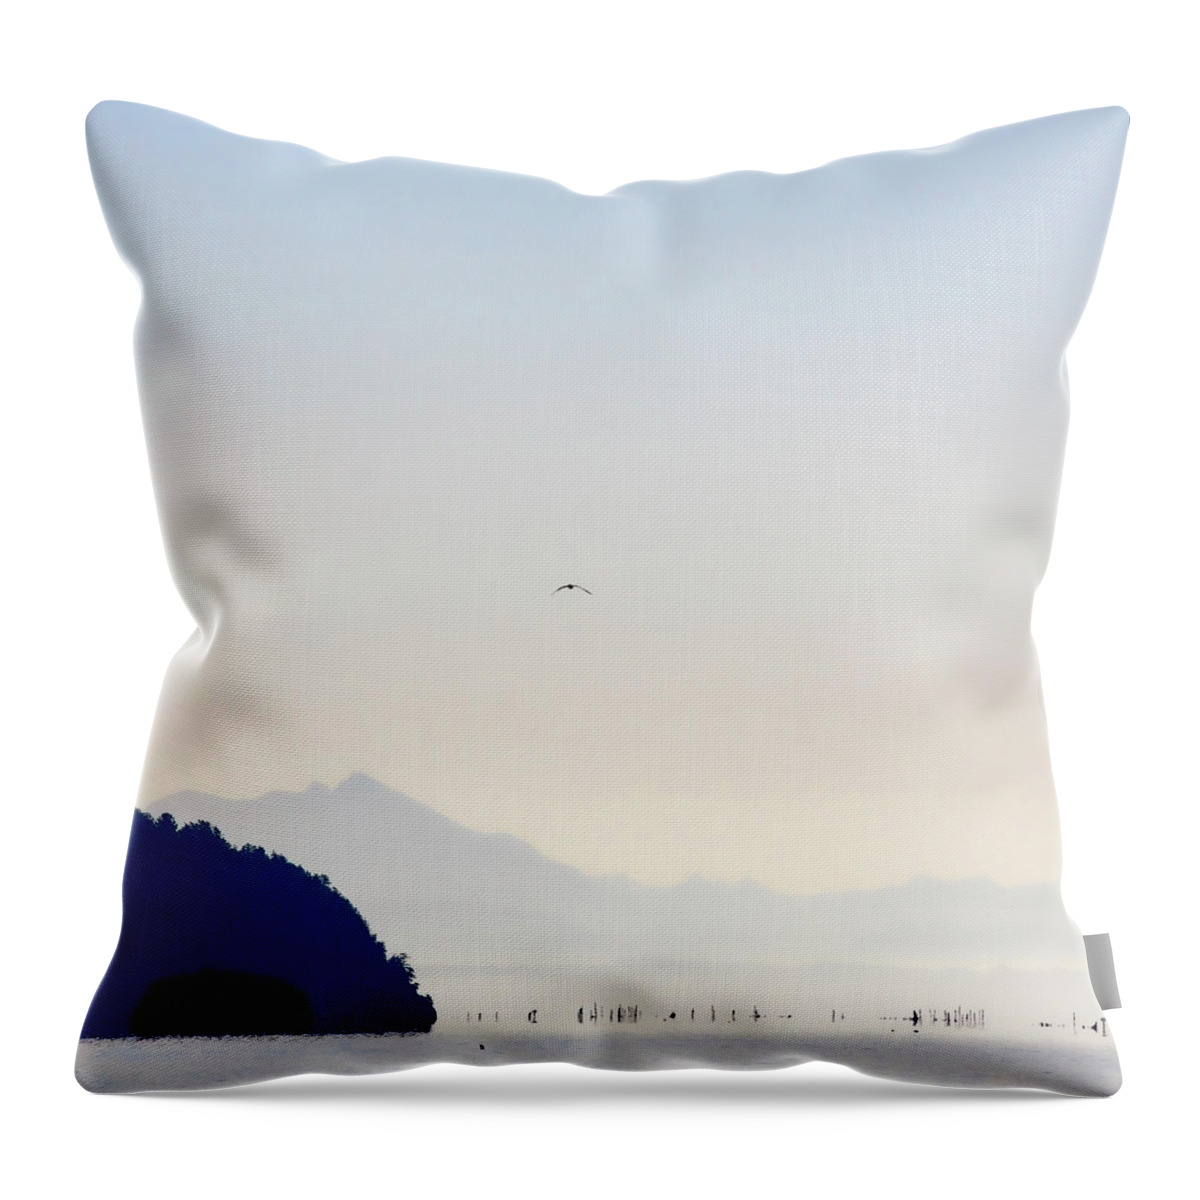 Whidbey Island Throw Pillow featuring the photograph Early Morning Ala Spit Whidbey Island Square Format by Carol Leigh